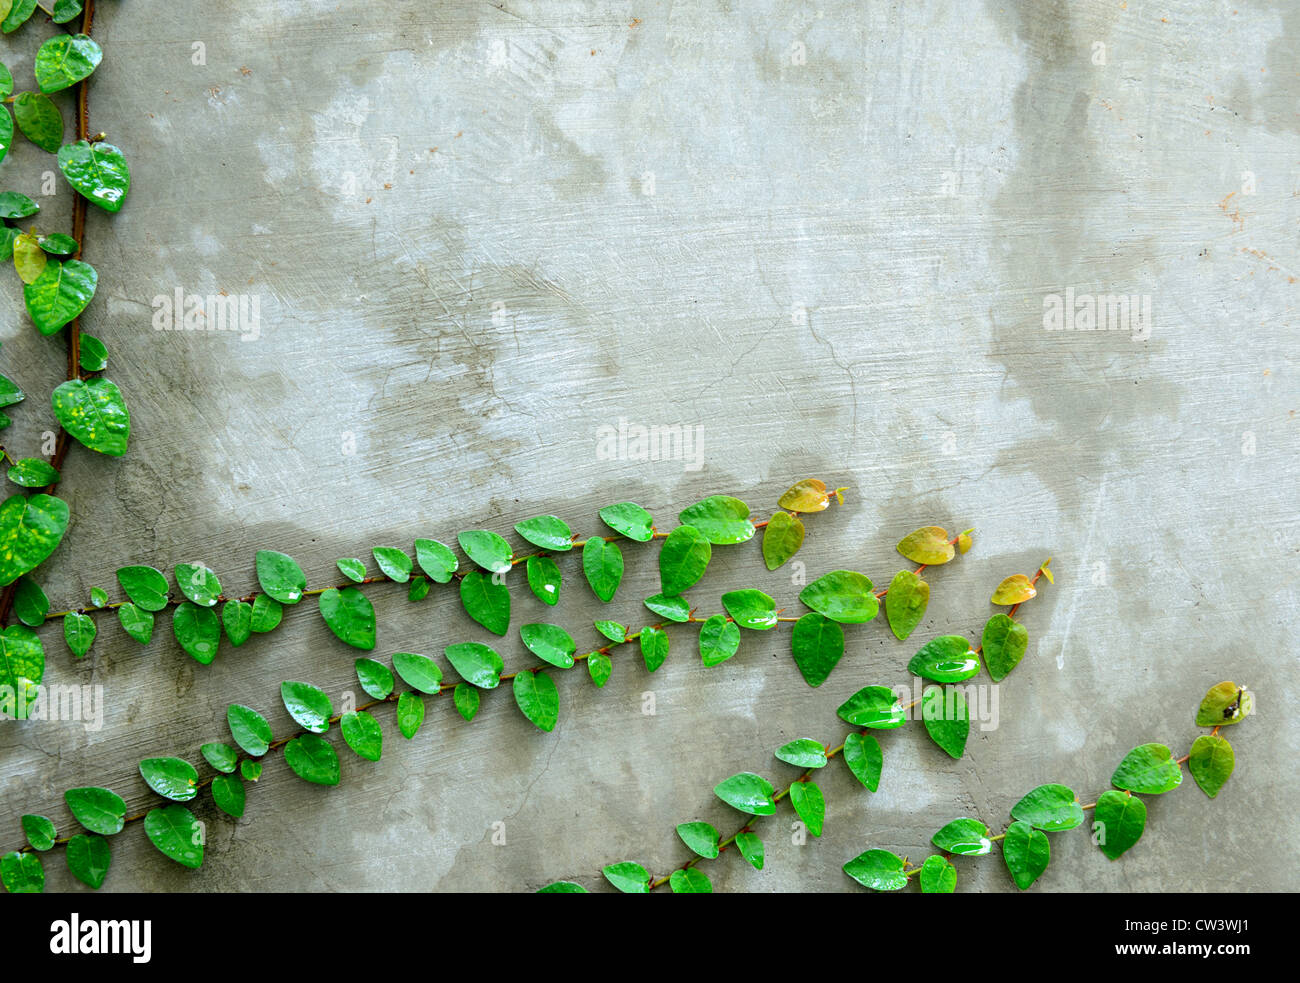 The Green Creeper Plant is nice pattern on the cement wall for background. Stock Photo